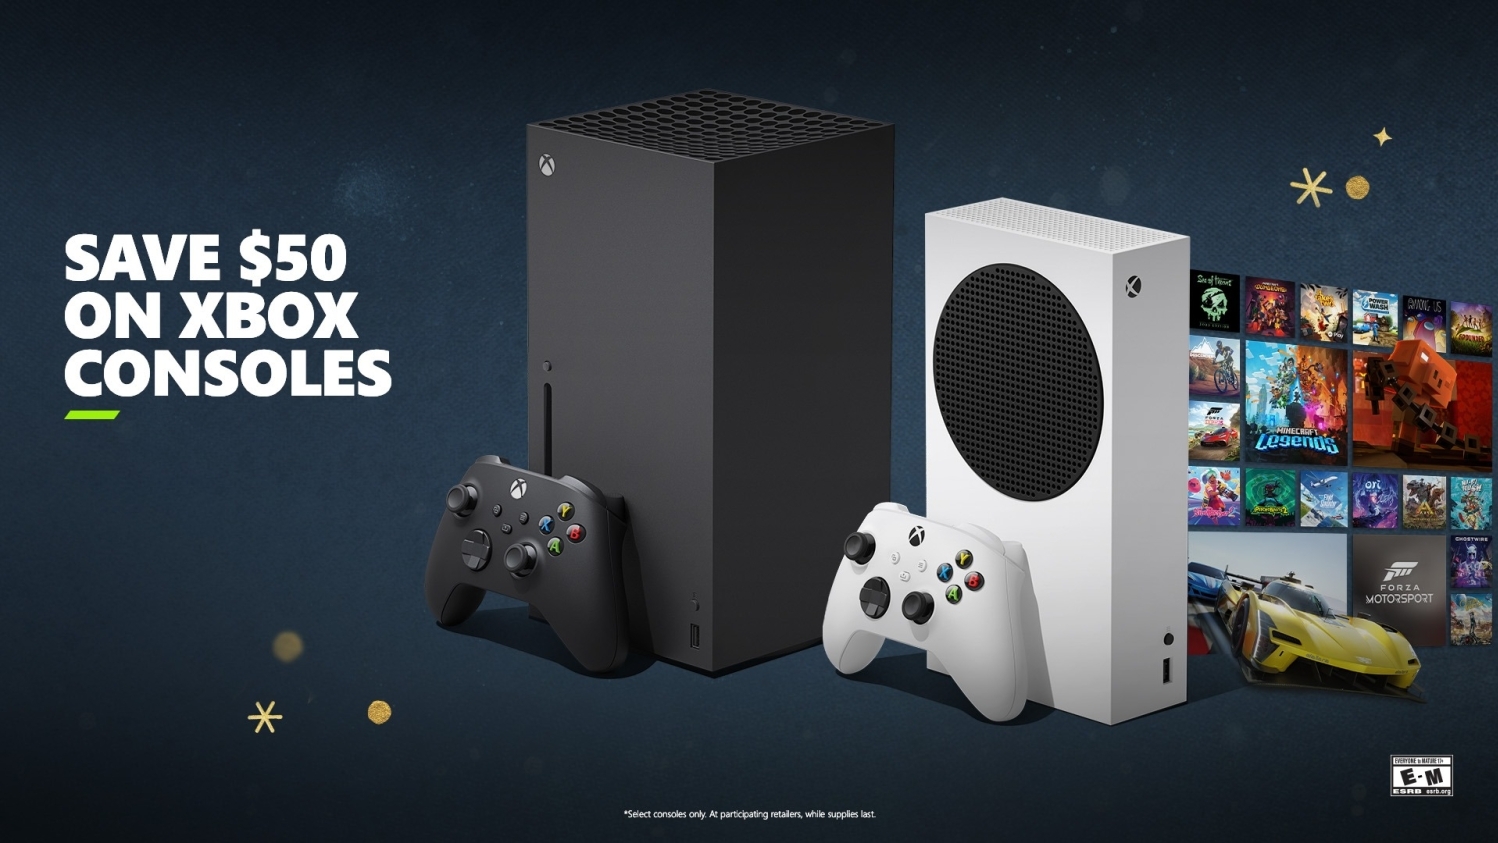 Black Friday deals still going on Xbox, Xbox Series X, games, controllers  and more — save up to 60%